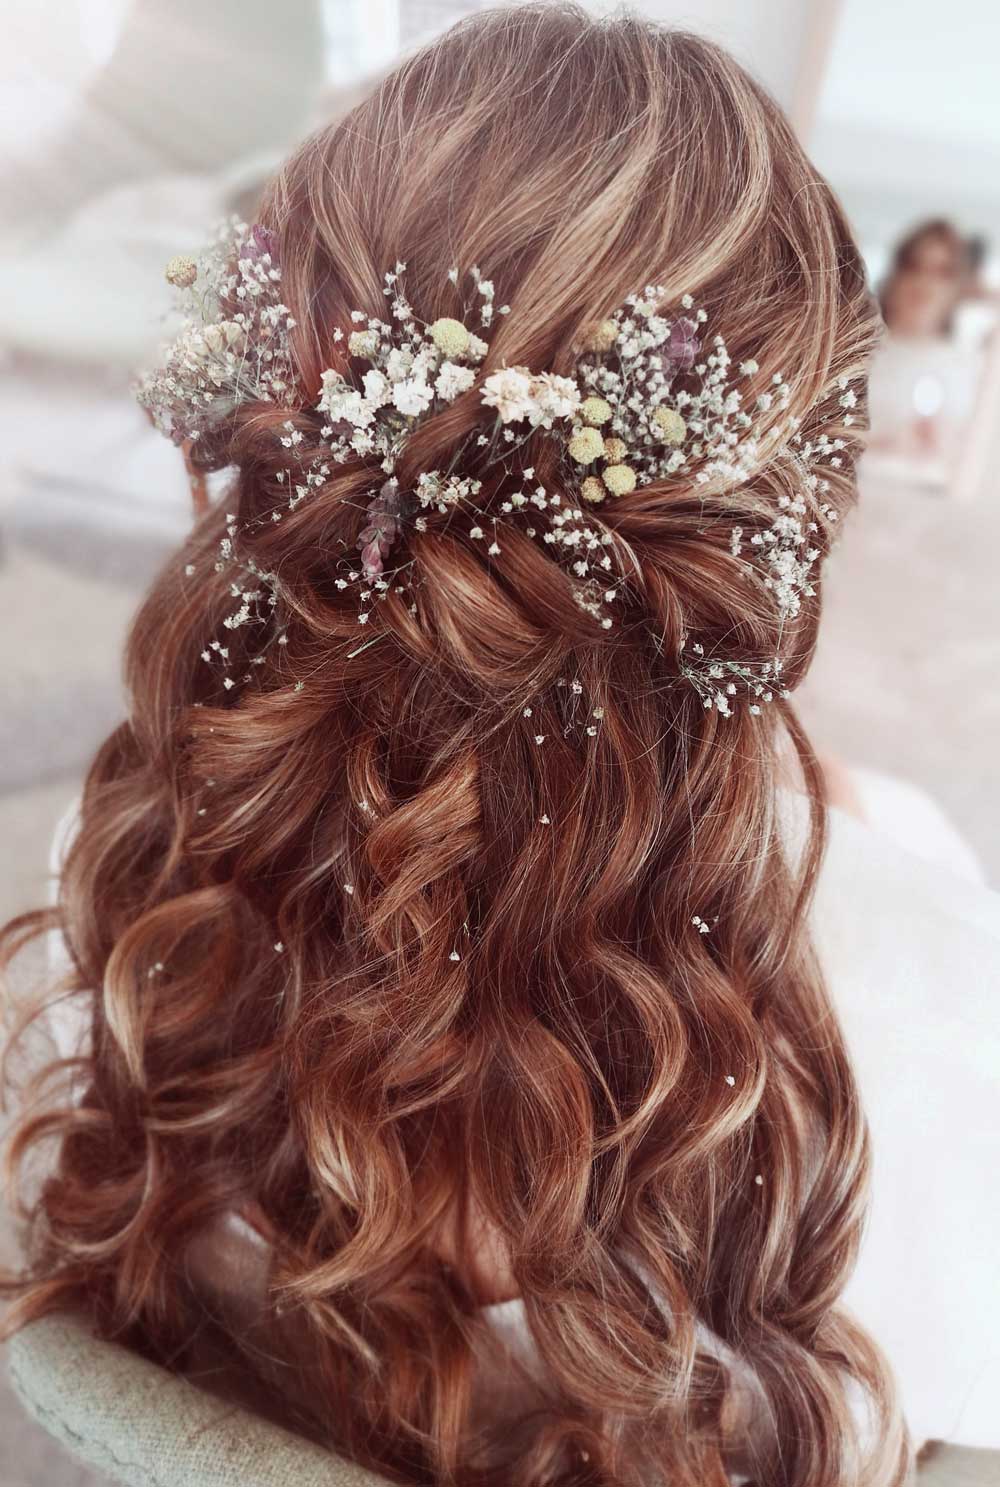 Long hair style, with dried flowers for wedding wairarapa